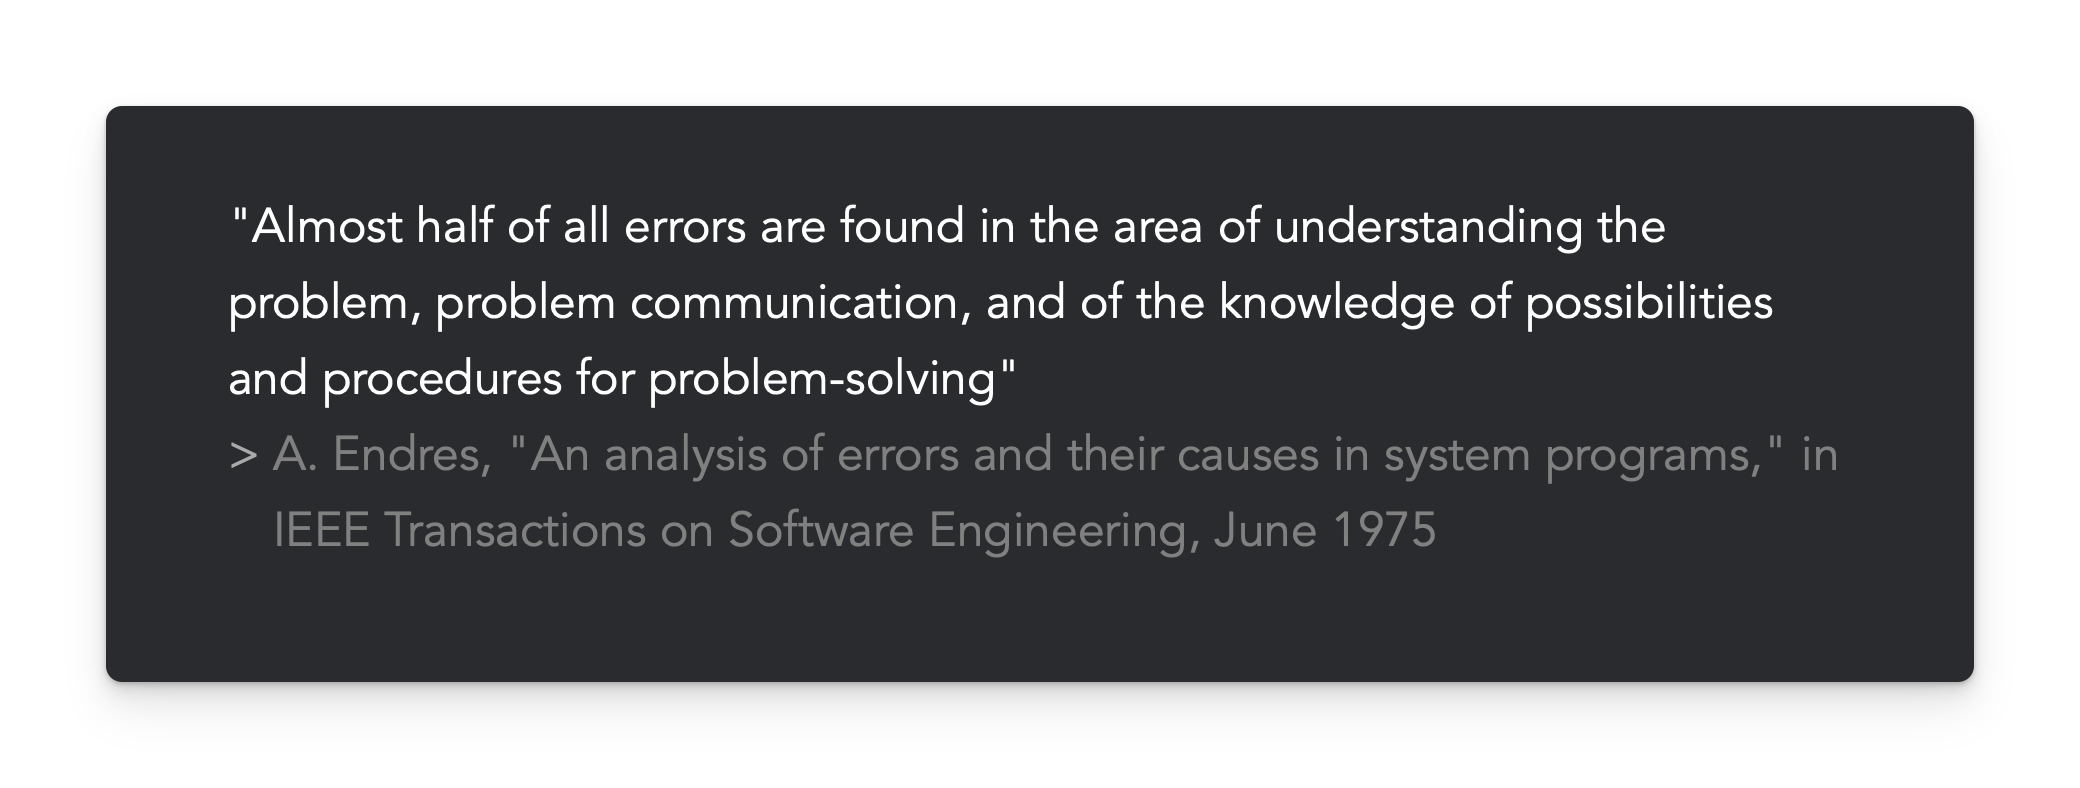 "Almost half of all errors are found in the area of understanding the problem, problem communication and of the knowledge of possibilities and procedures for problem-solving"